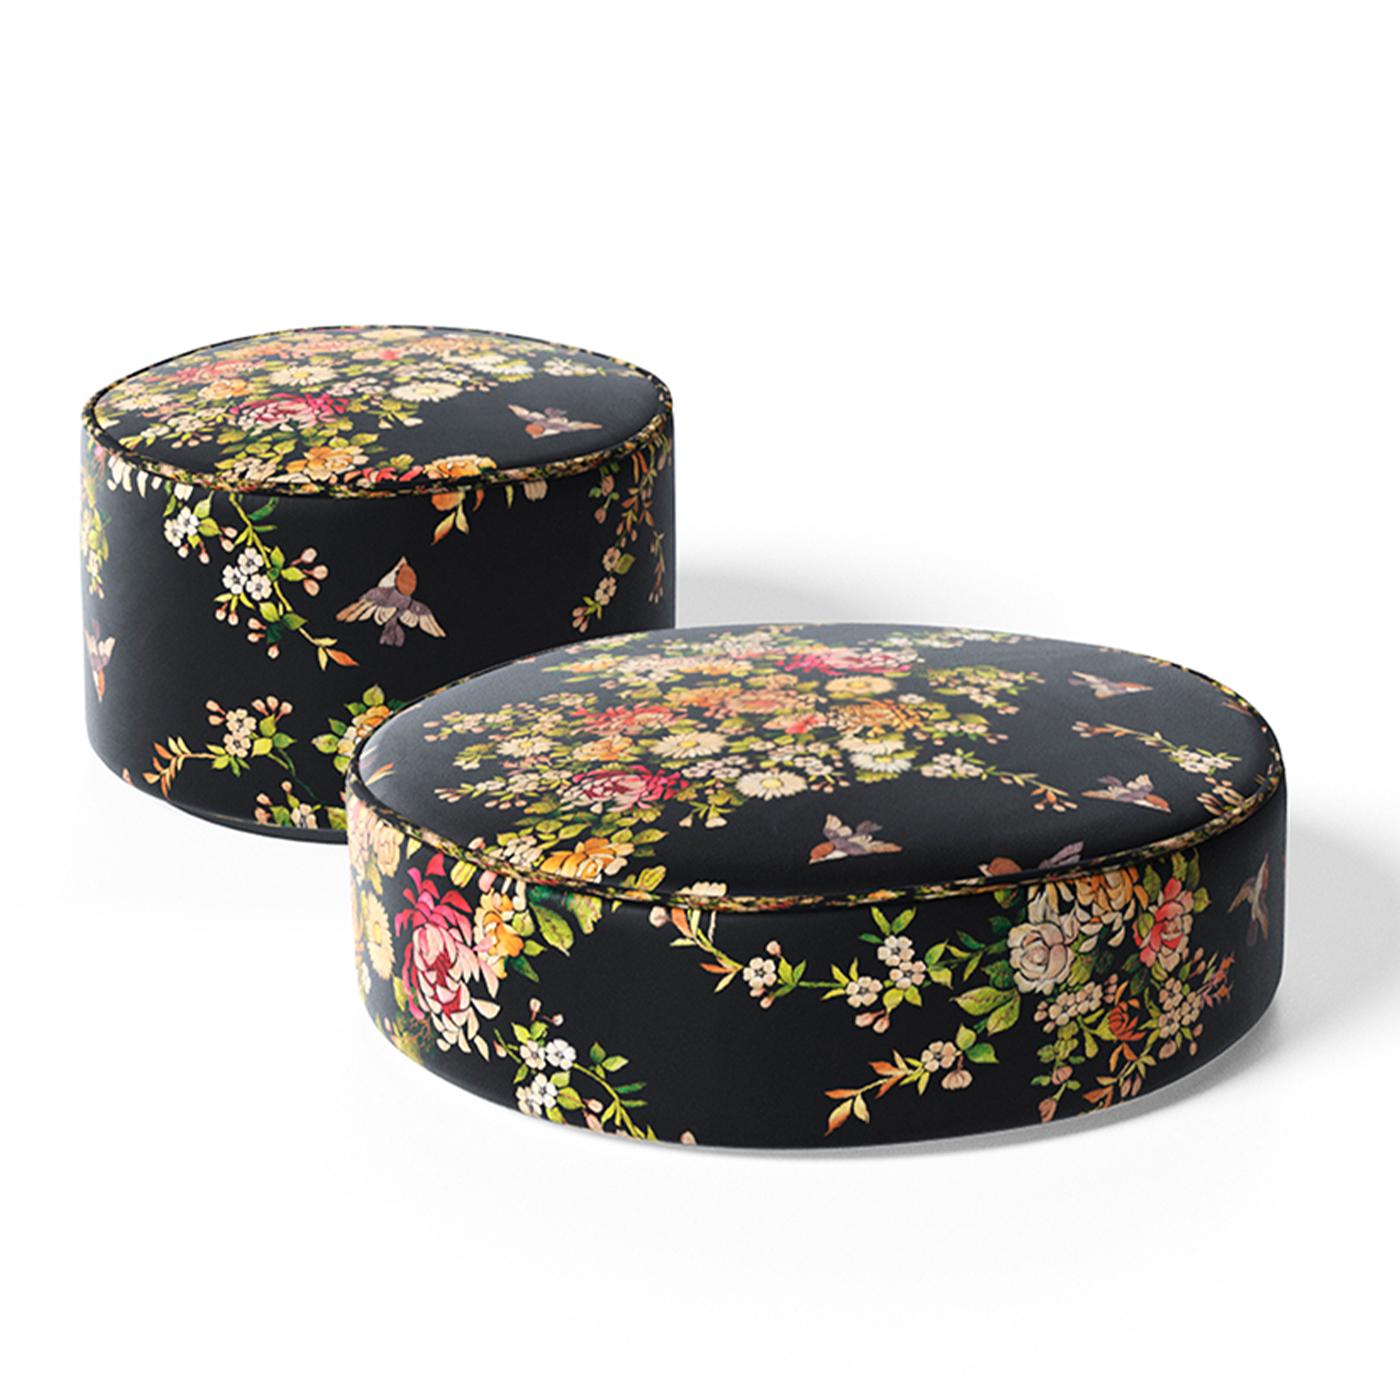 Pouf with black or white lacquered wooden base, self-supporting foam padding. Upholstery in printed synthetic fabric “Tree of Life” by Simone Guidarelli on a black or cream background.